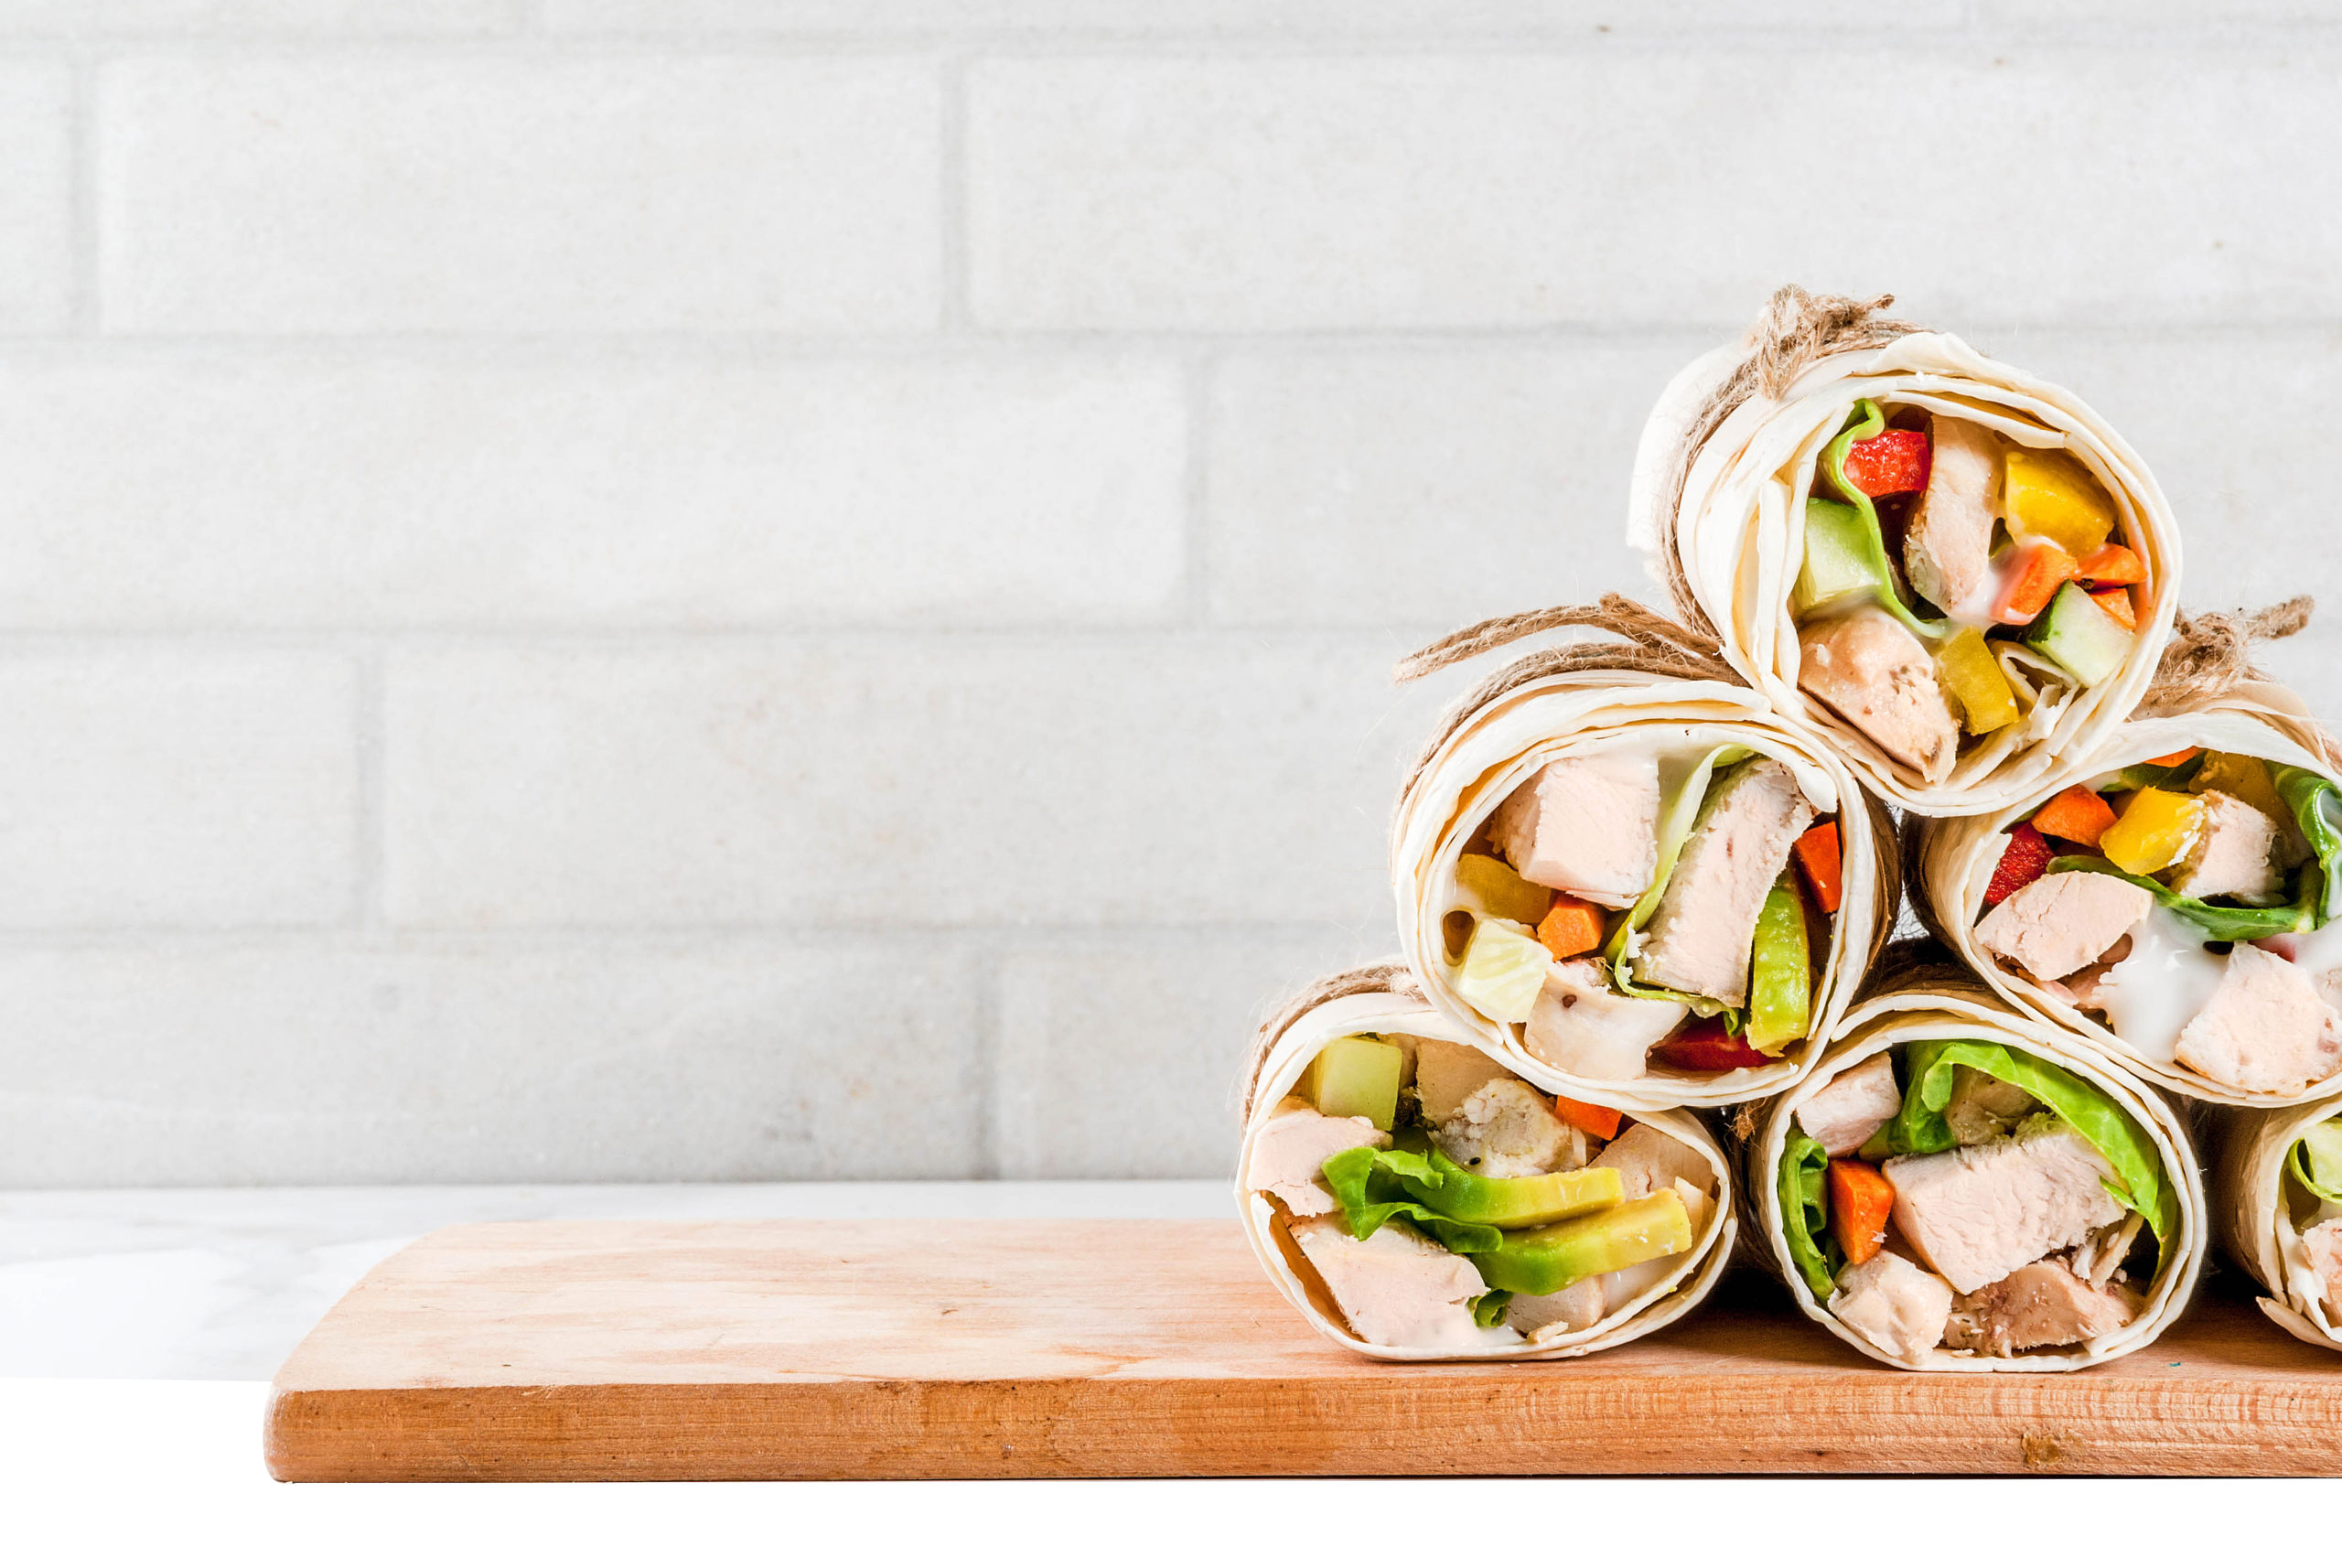 Stacked tortilla wraps sandwiches